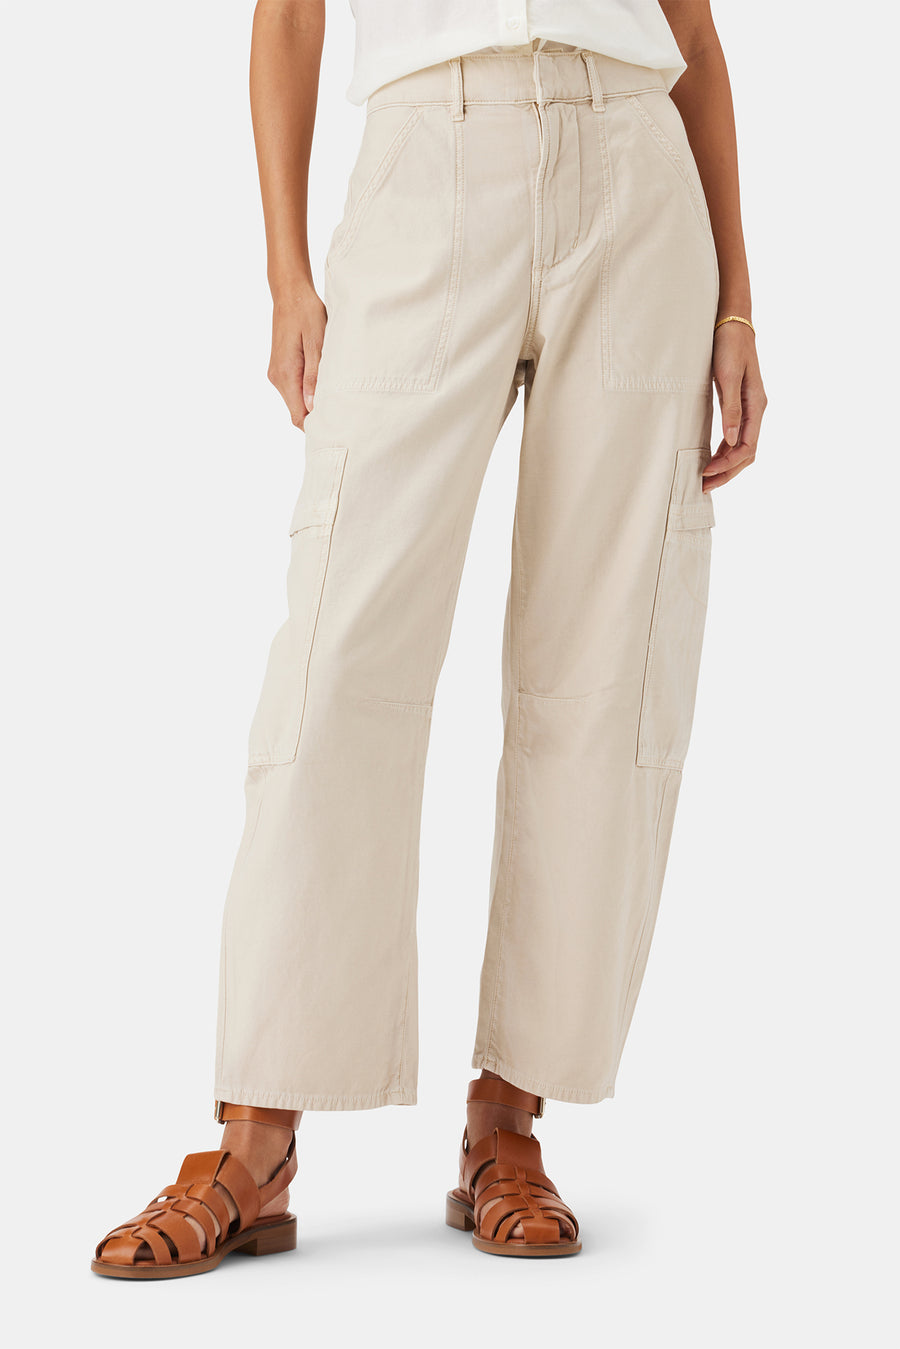 Citizens of Humanity Marcelle Cargo Pant - Taos Sand